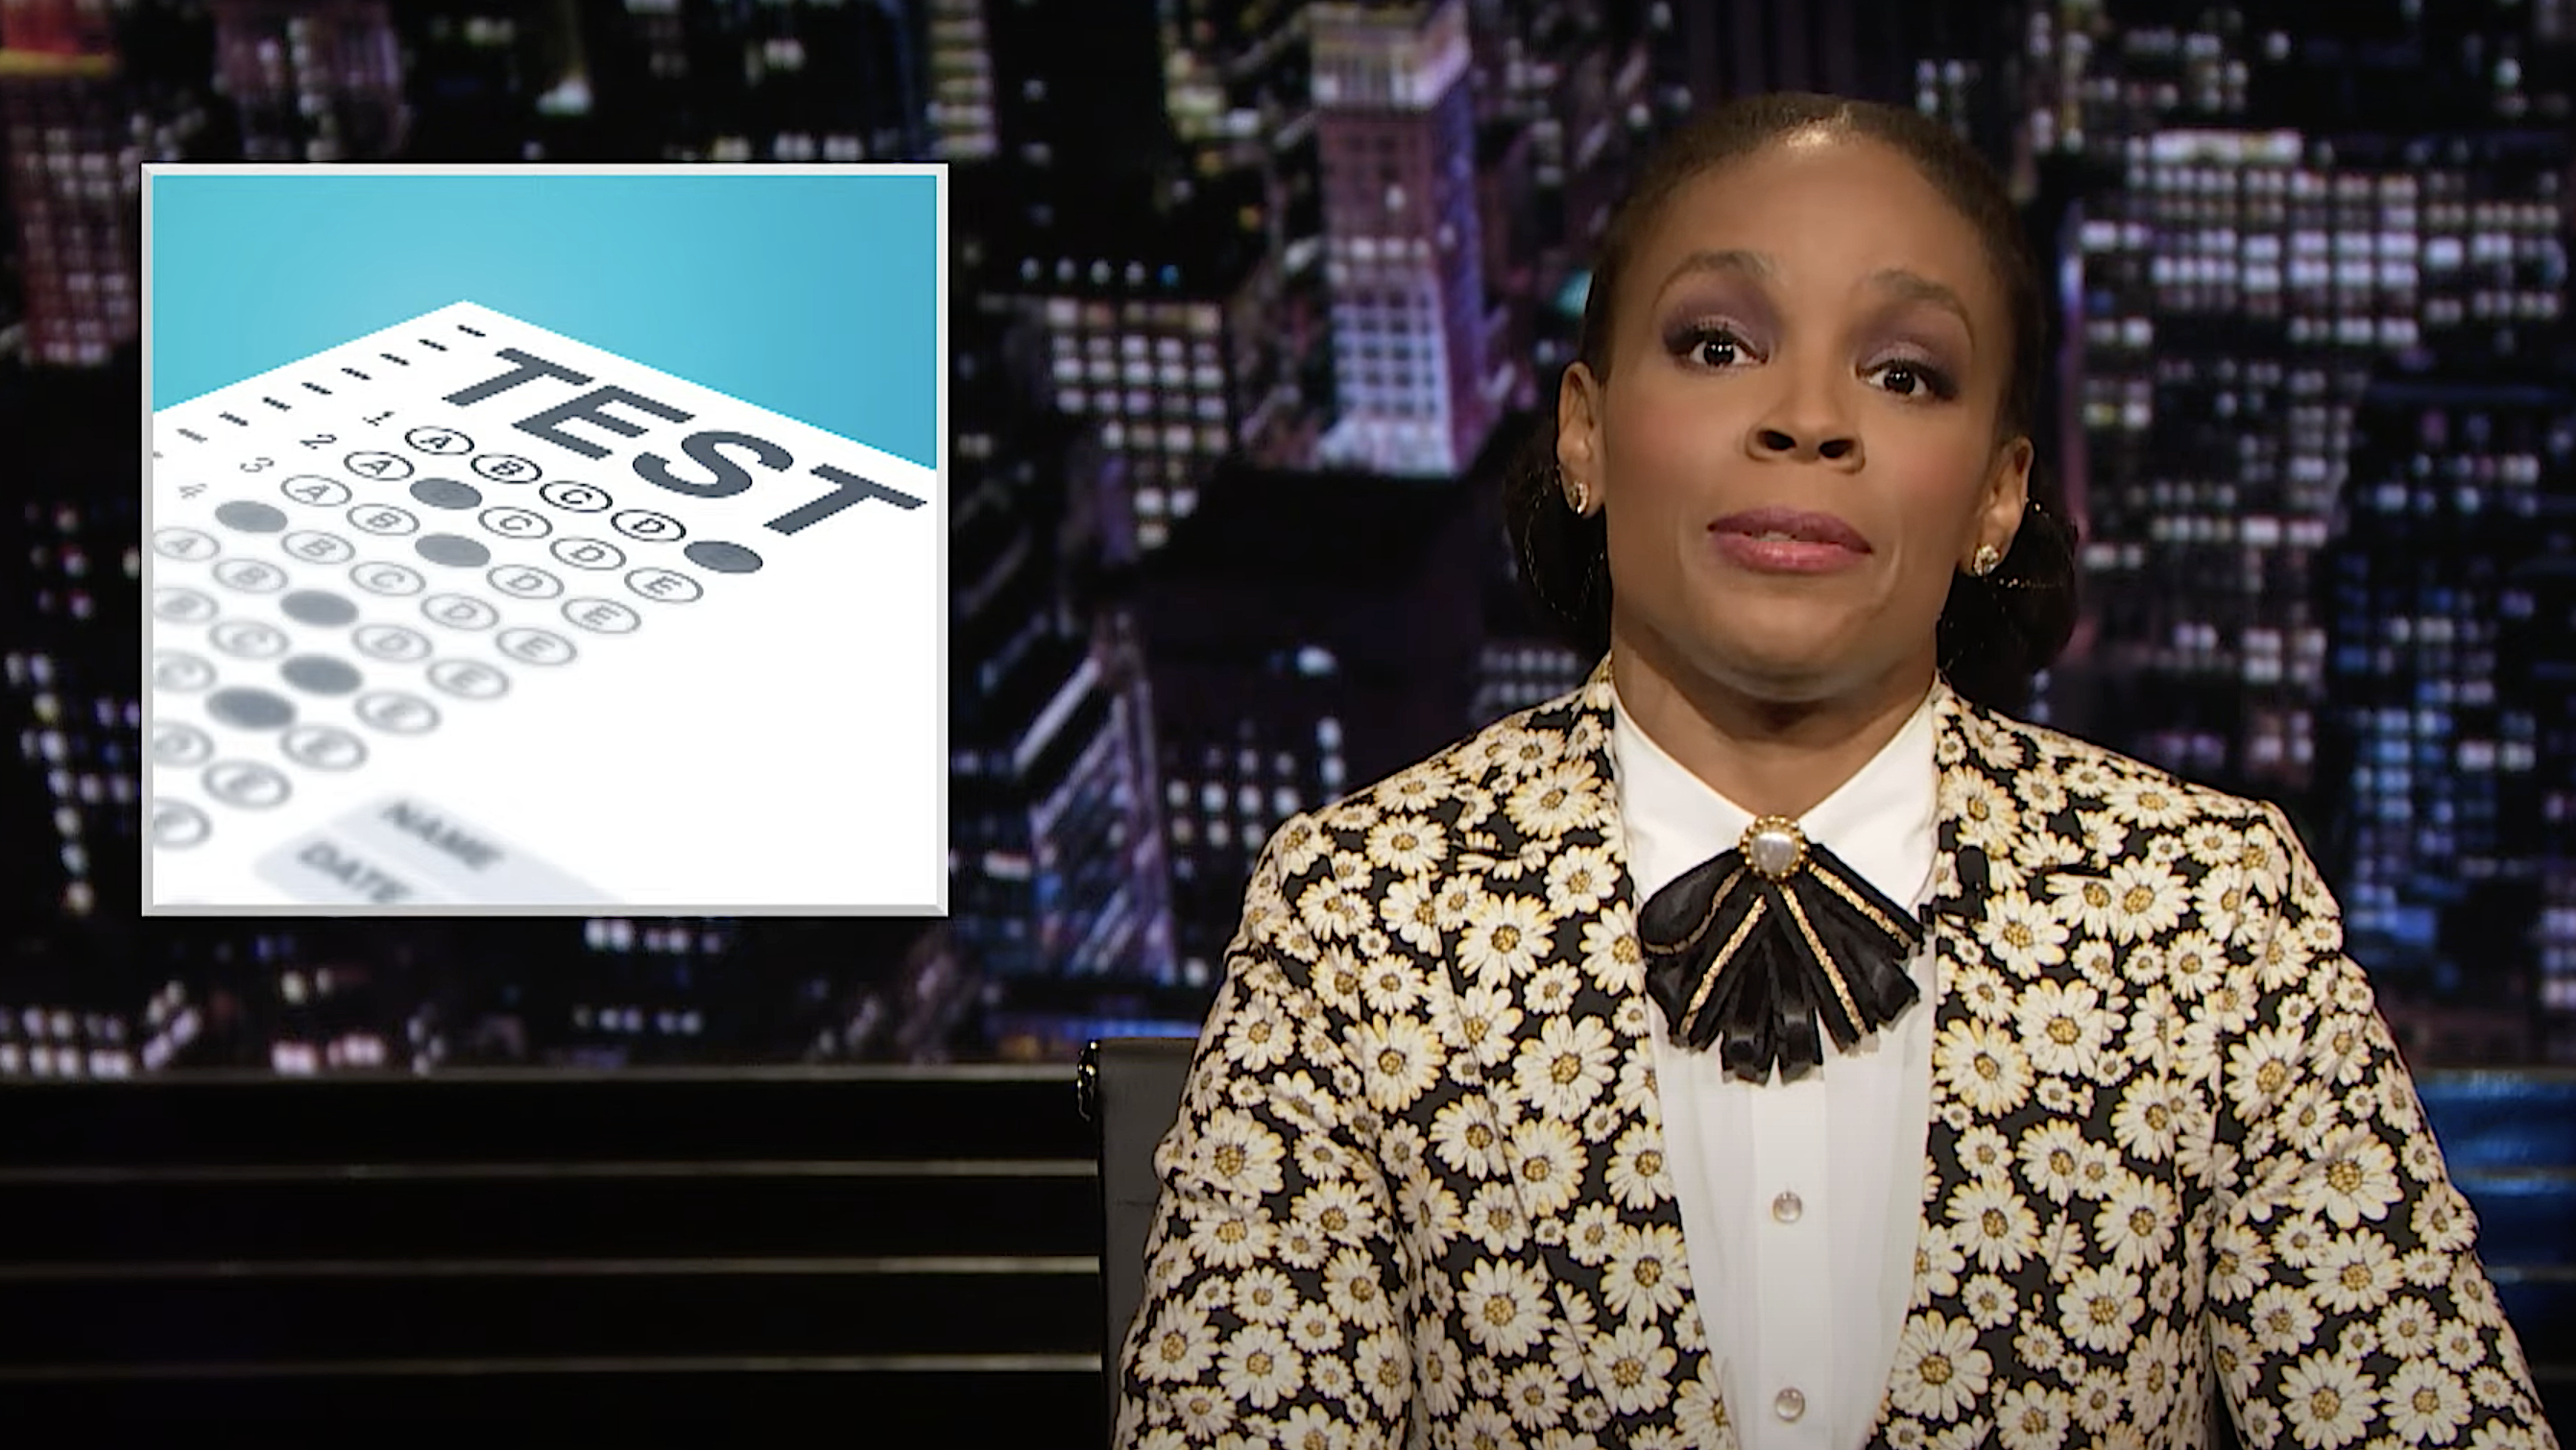 As kids head back to class, Amber Ruffin schools viewers on the racist legacy of the SATs